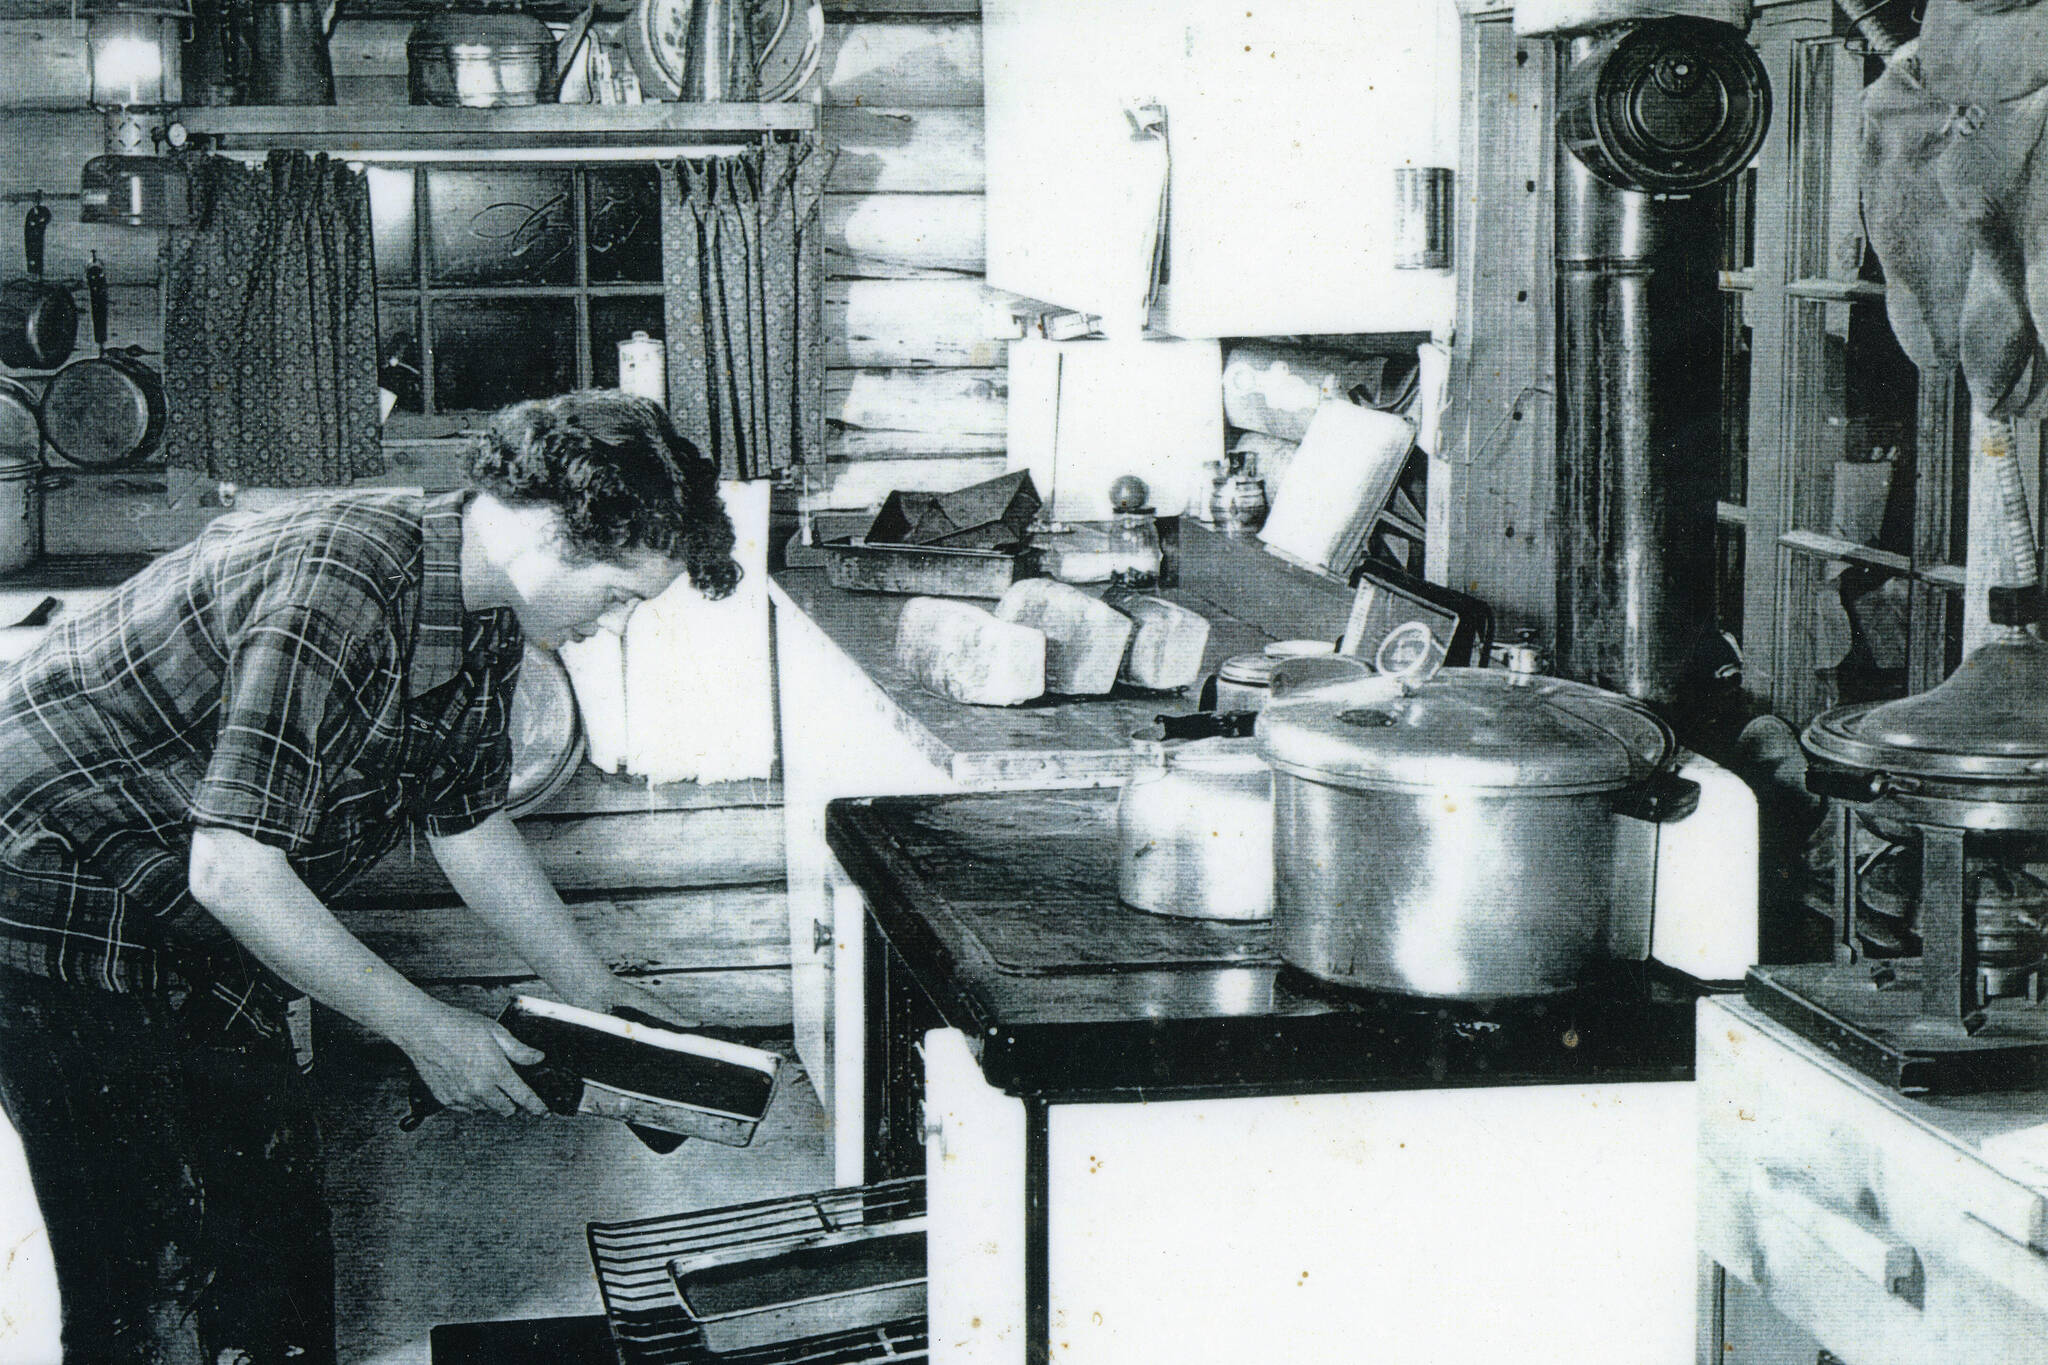 Rusty Lancashire does some baking. (1954 photo by Bob and Ira Spring for Better Homes & Garden magazine)